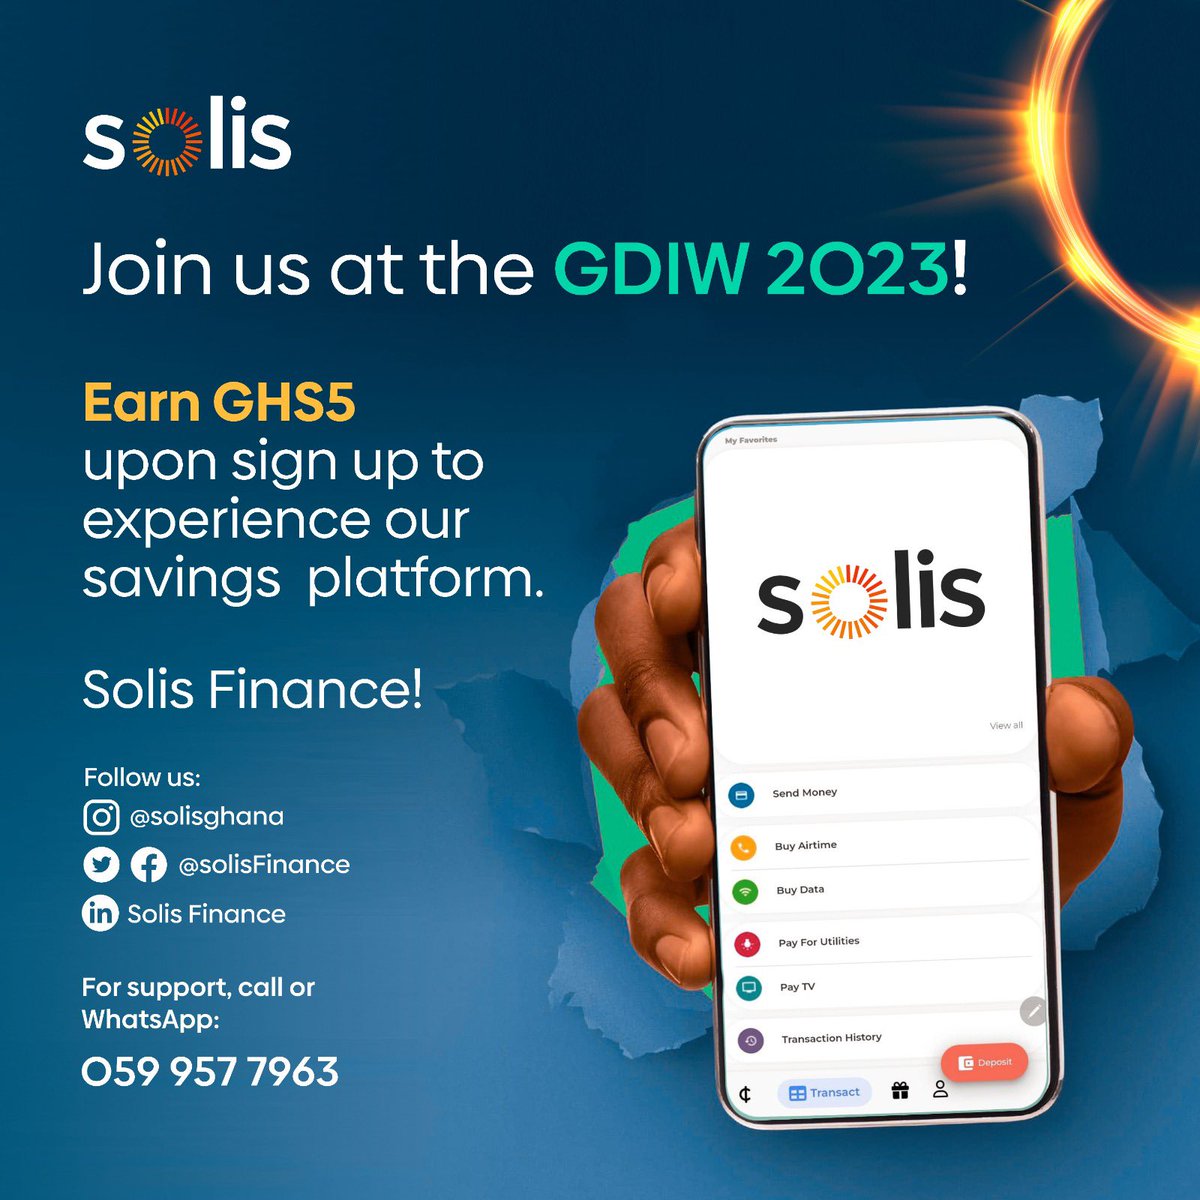 Join us from 6-8 November at the Accra International Conference Center to experience a celebration of innovation at the GDIW 2023
#GDIW2023 # GDIW #SolisFinance #DigitalConference #bank